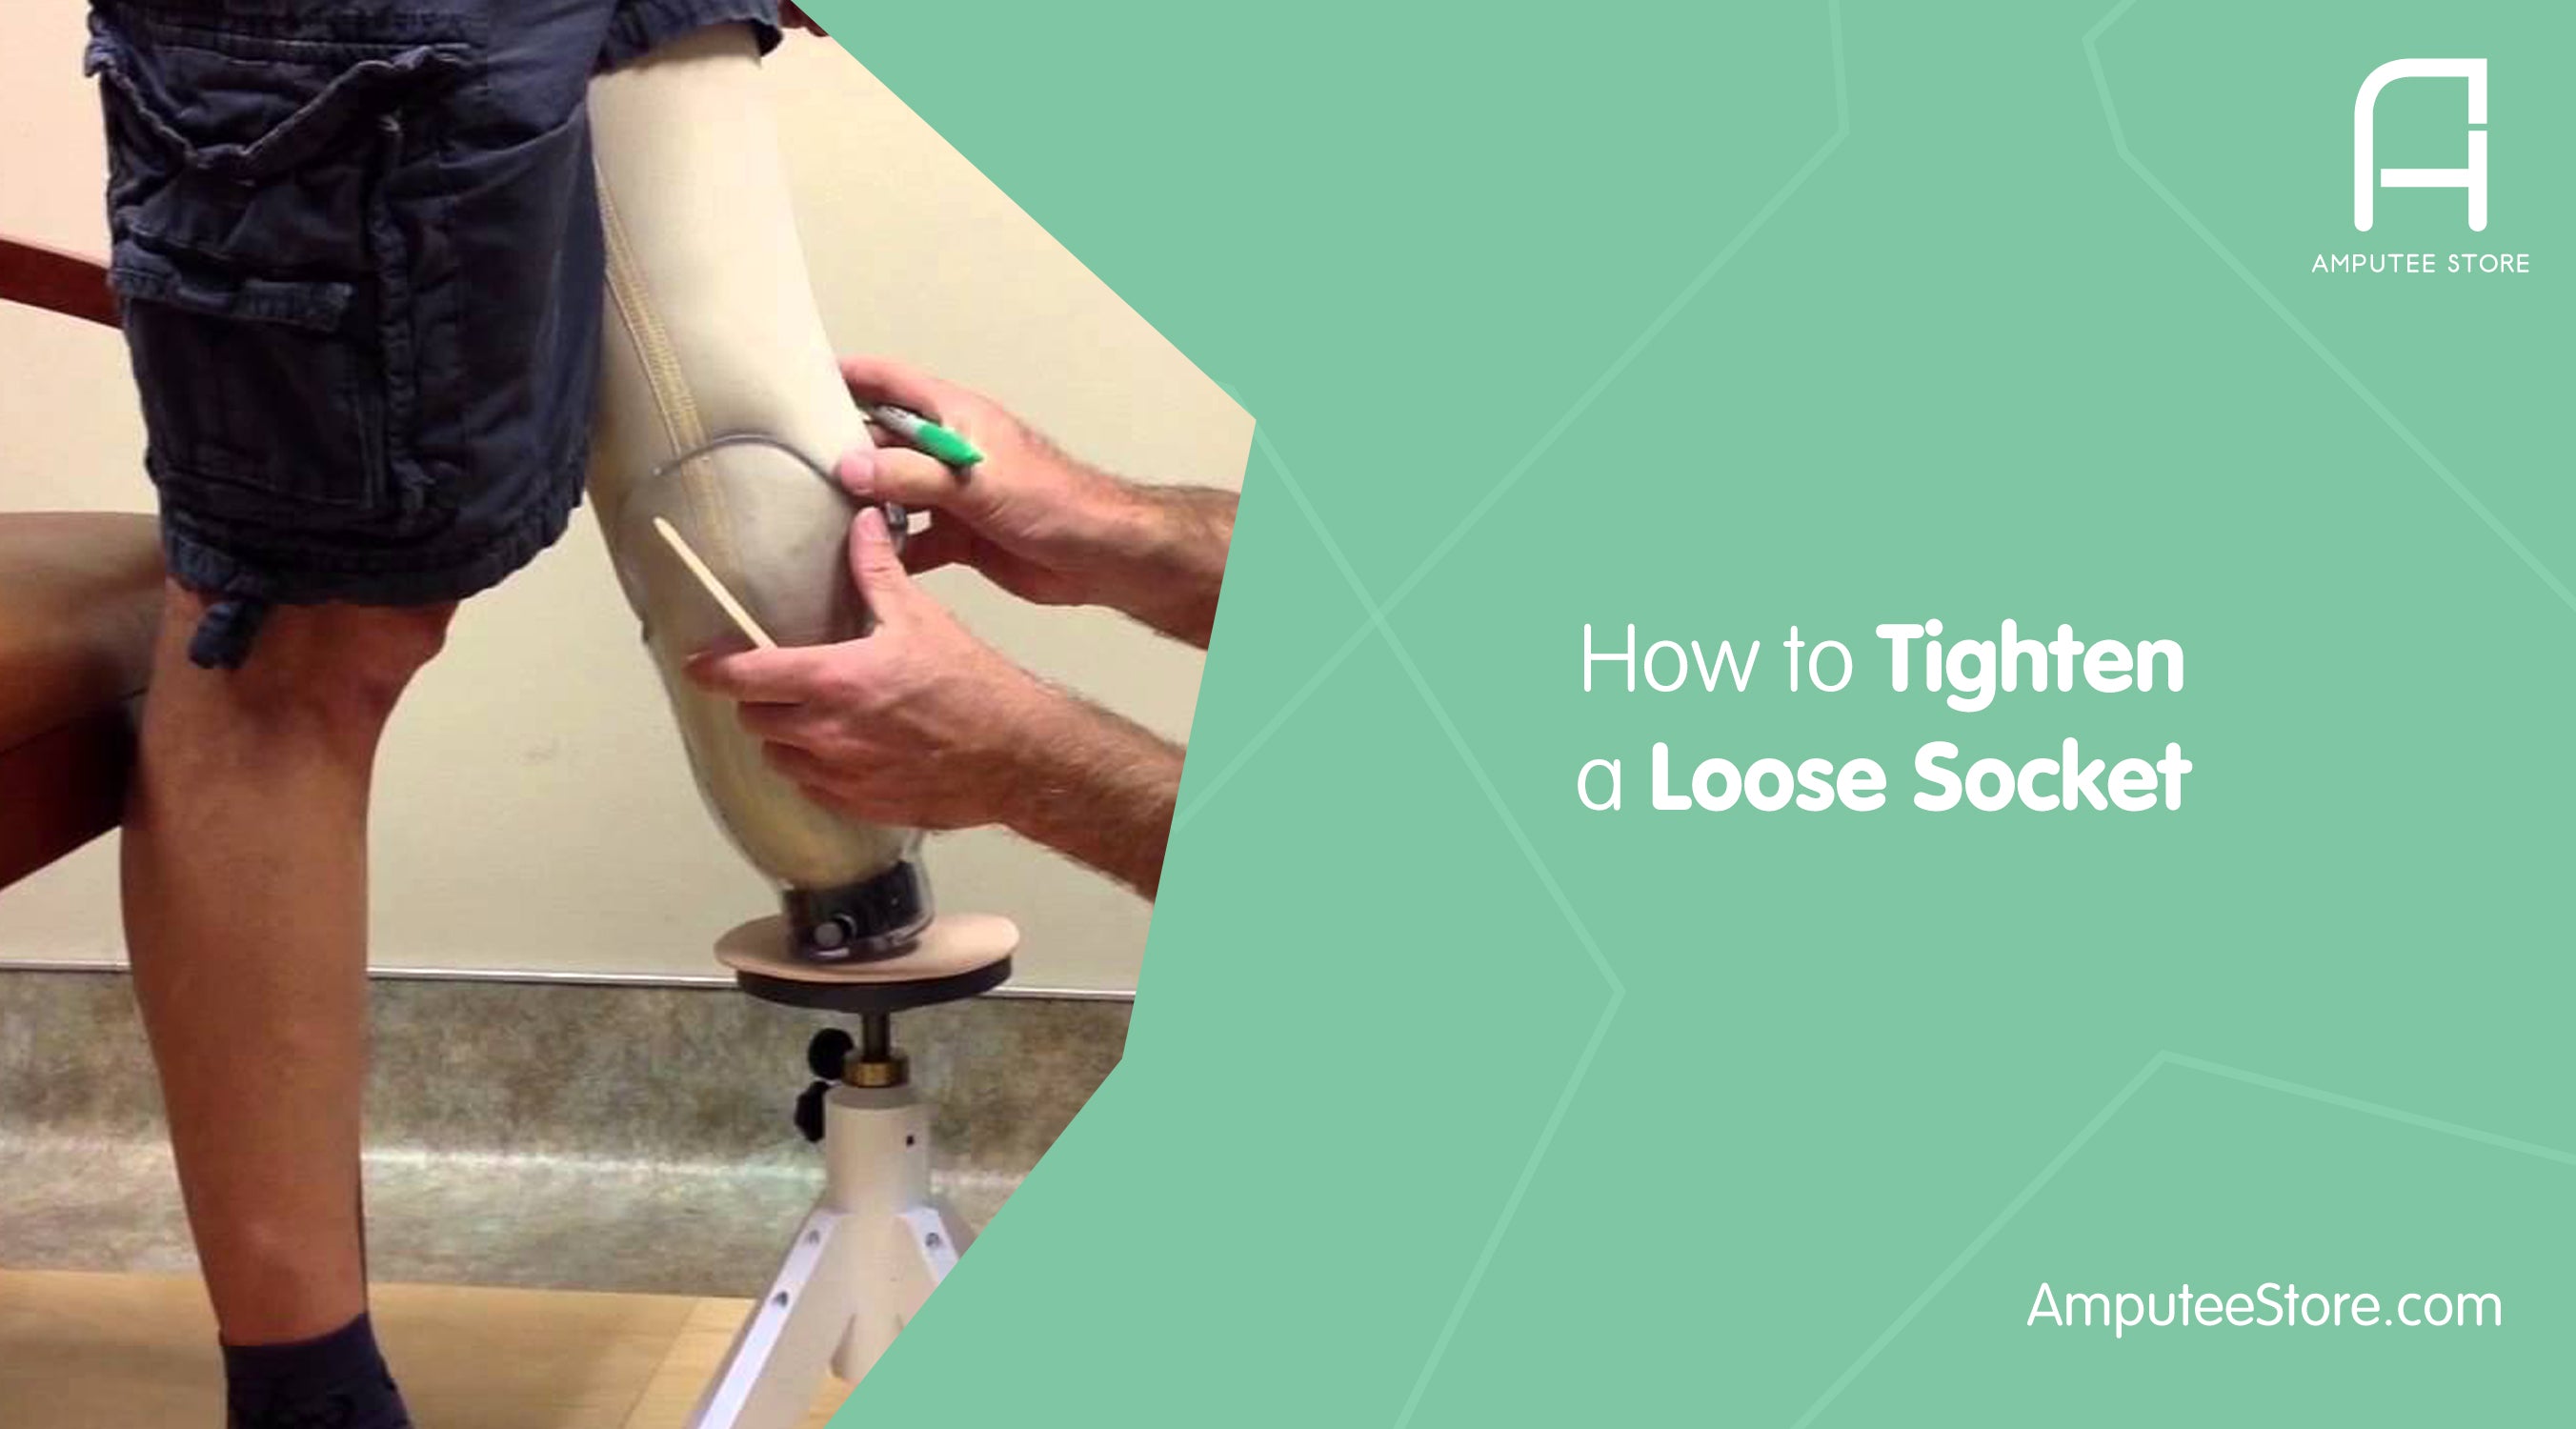 How to Tighten A Loose Prosthetic Socket